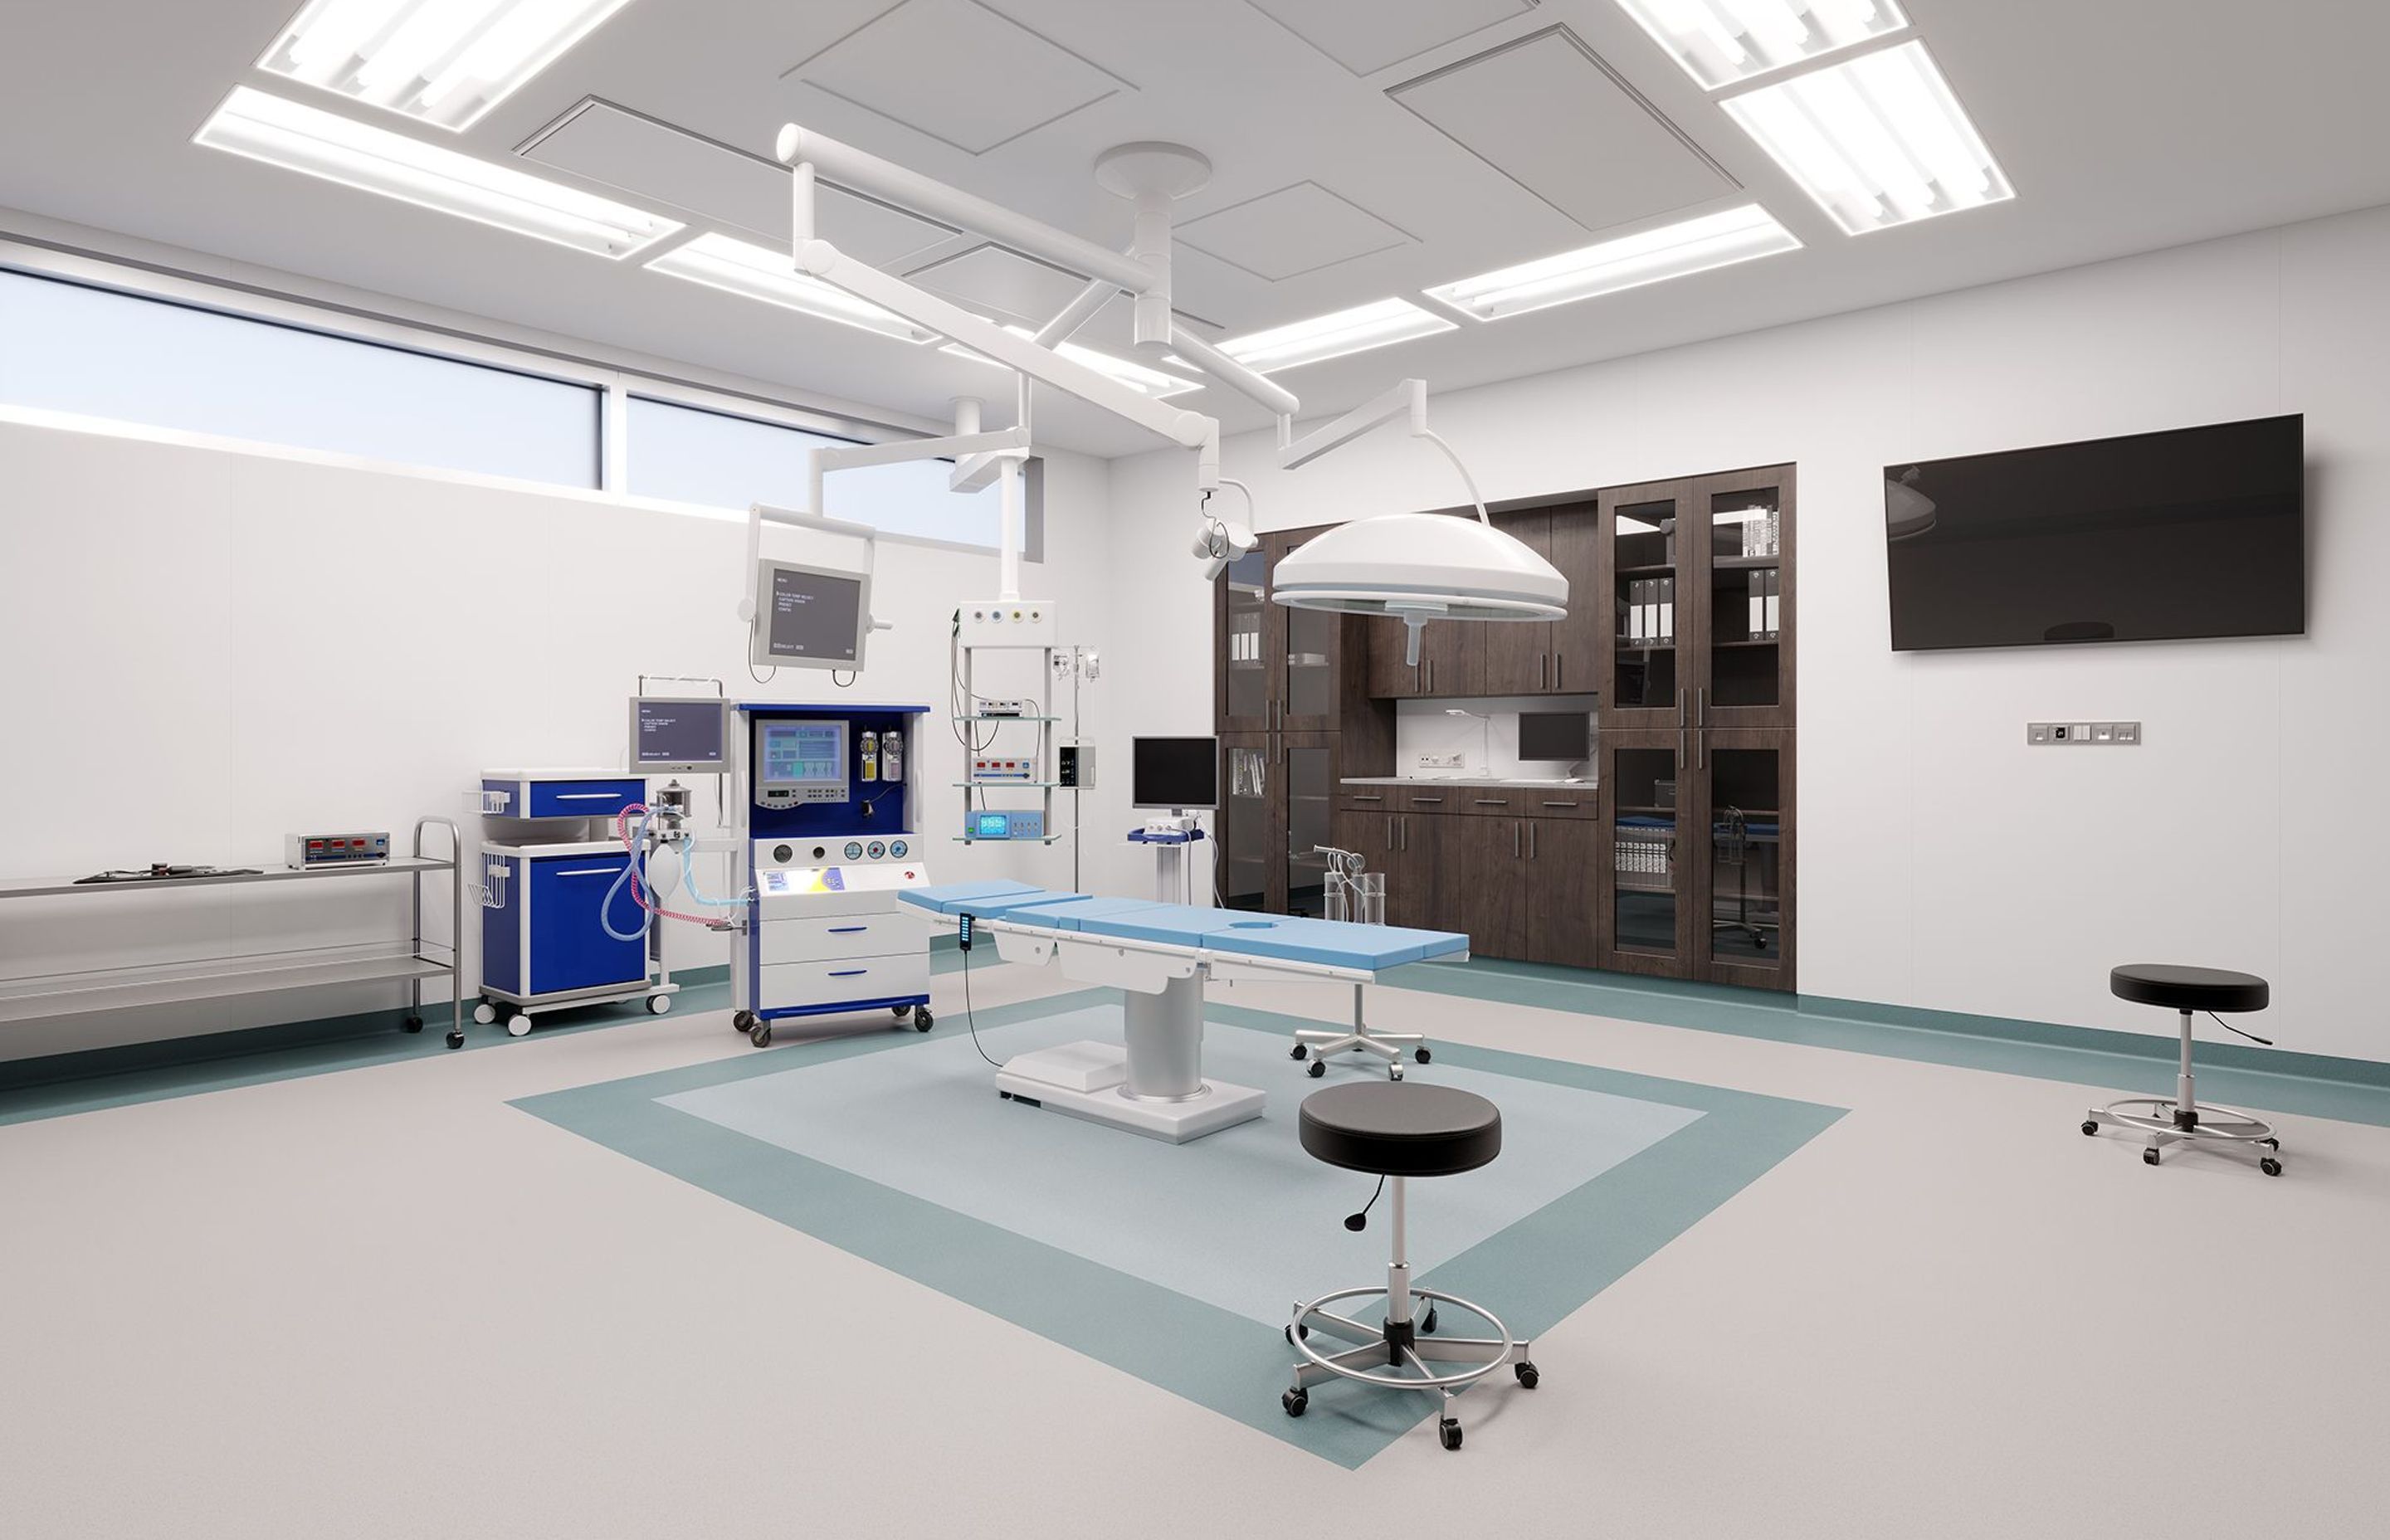 Altro introduces Suprema: safety flooring that combines style, durability and easy cleaning